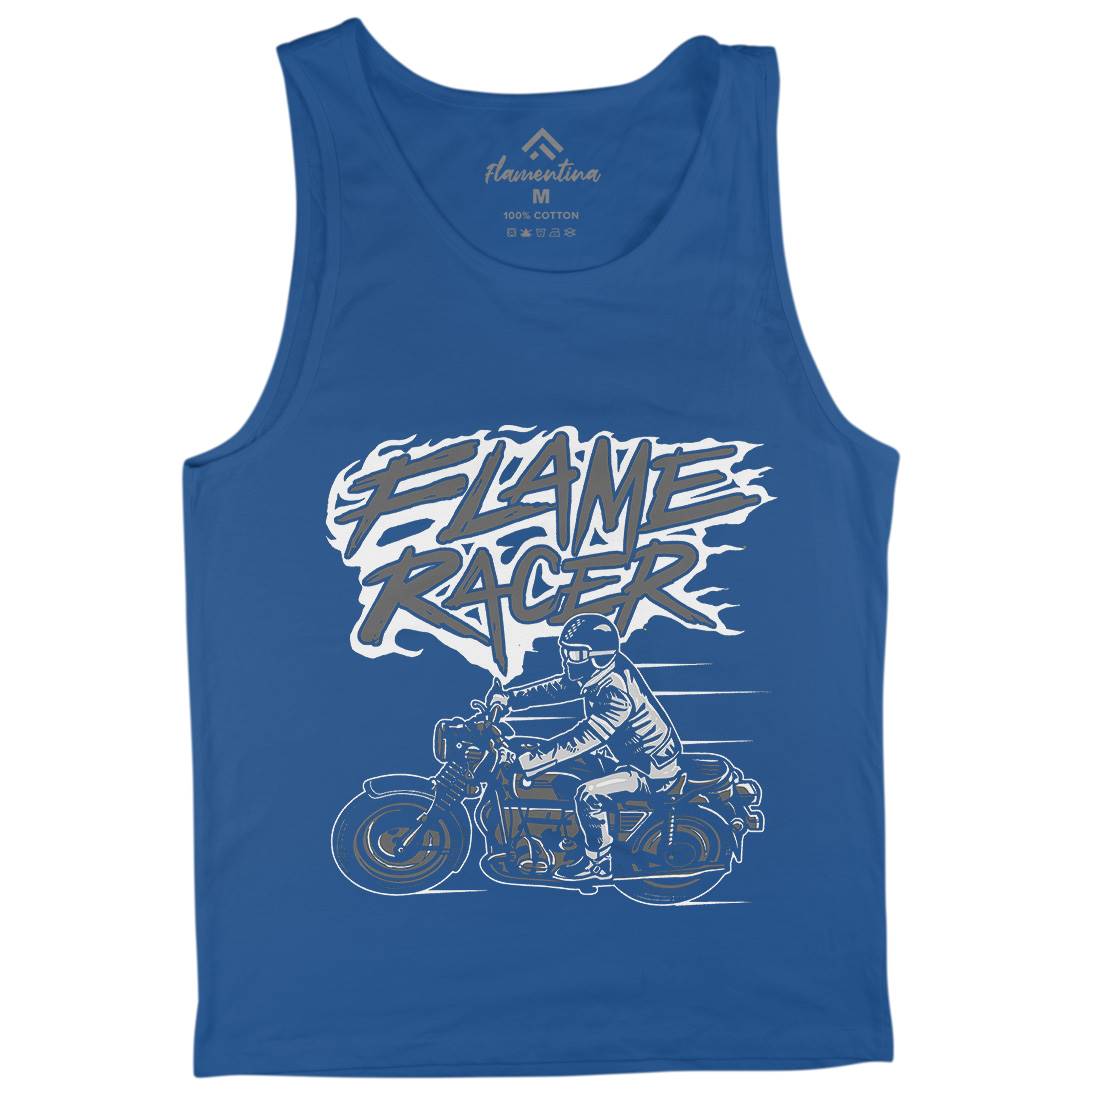 Flame Racer Mens Tank Top Vest Motorcycles A530